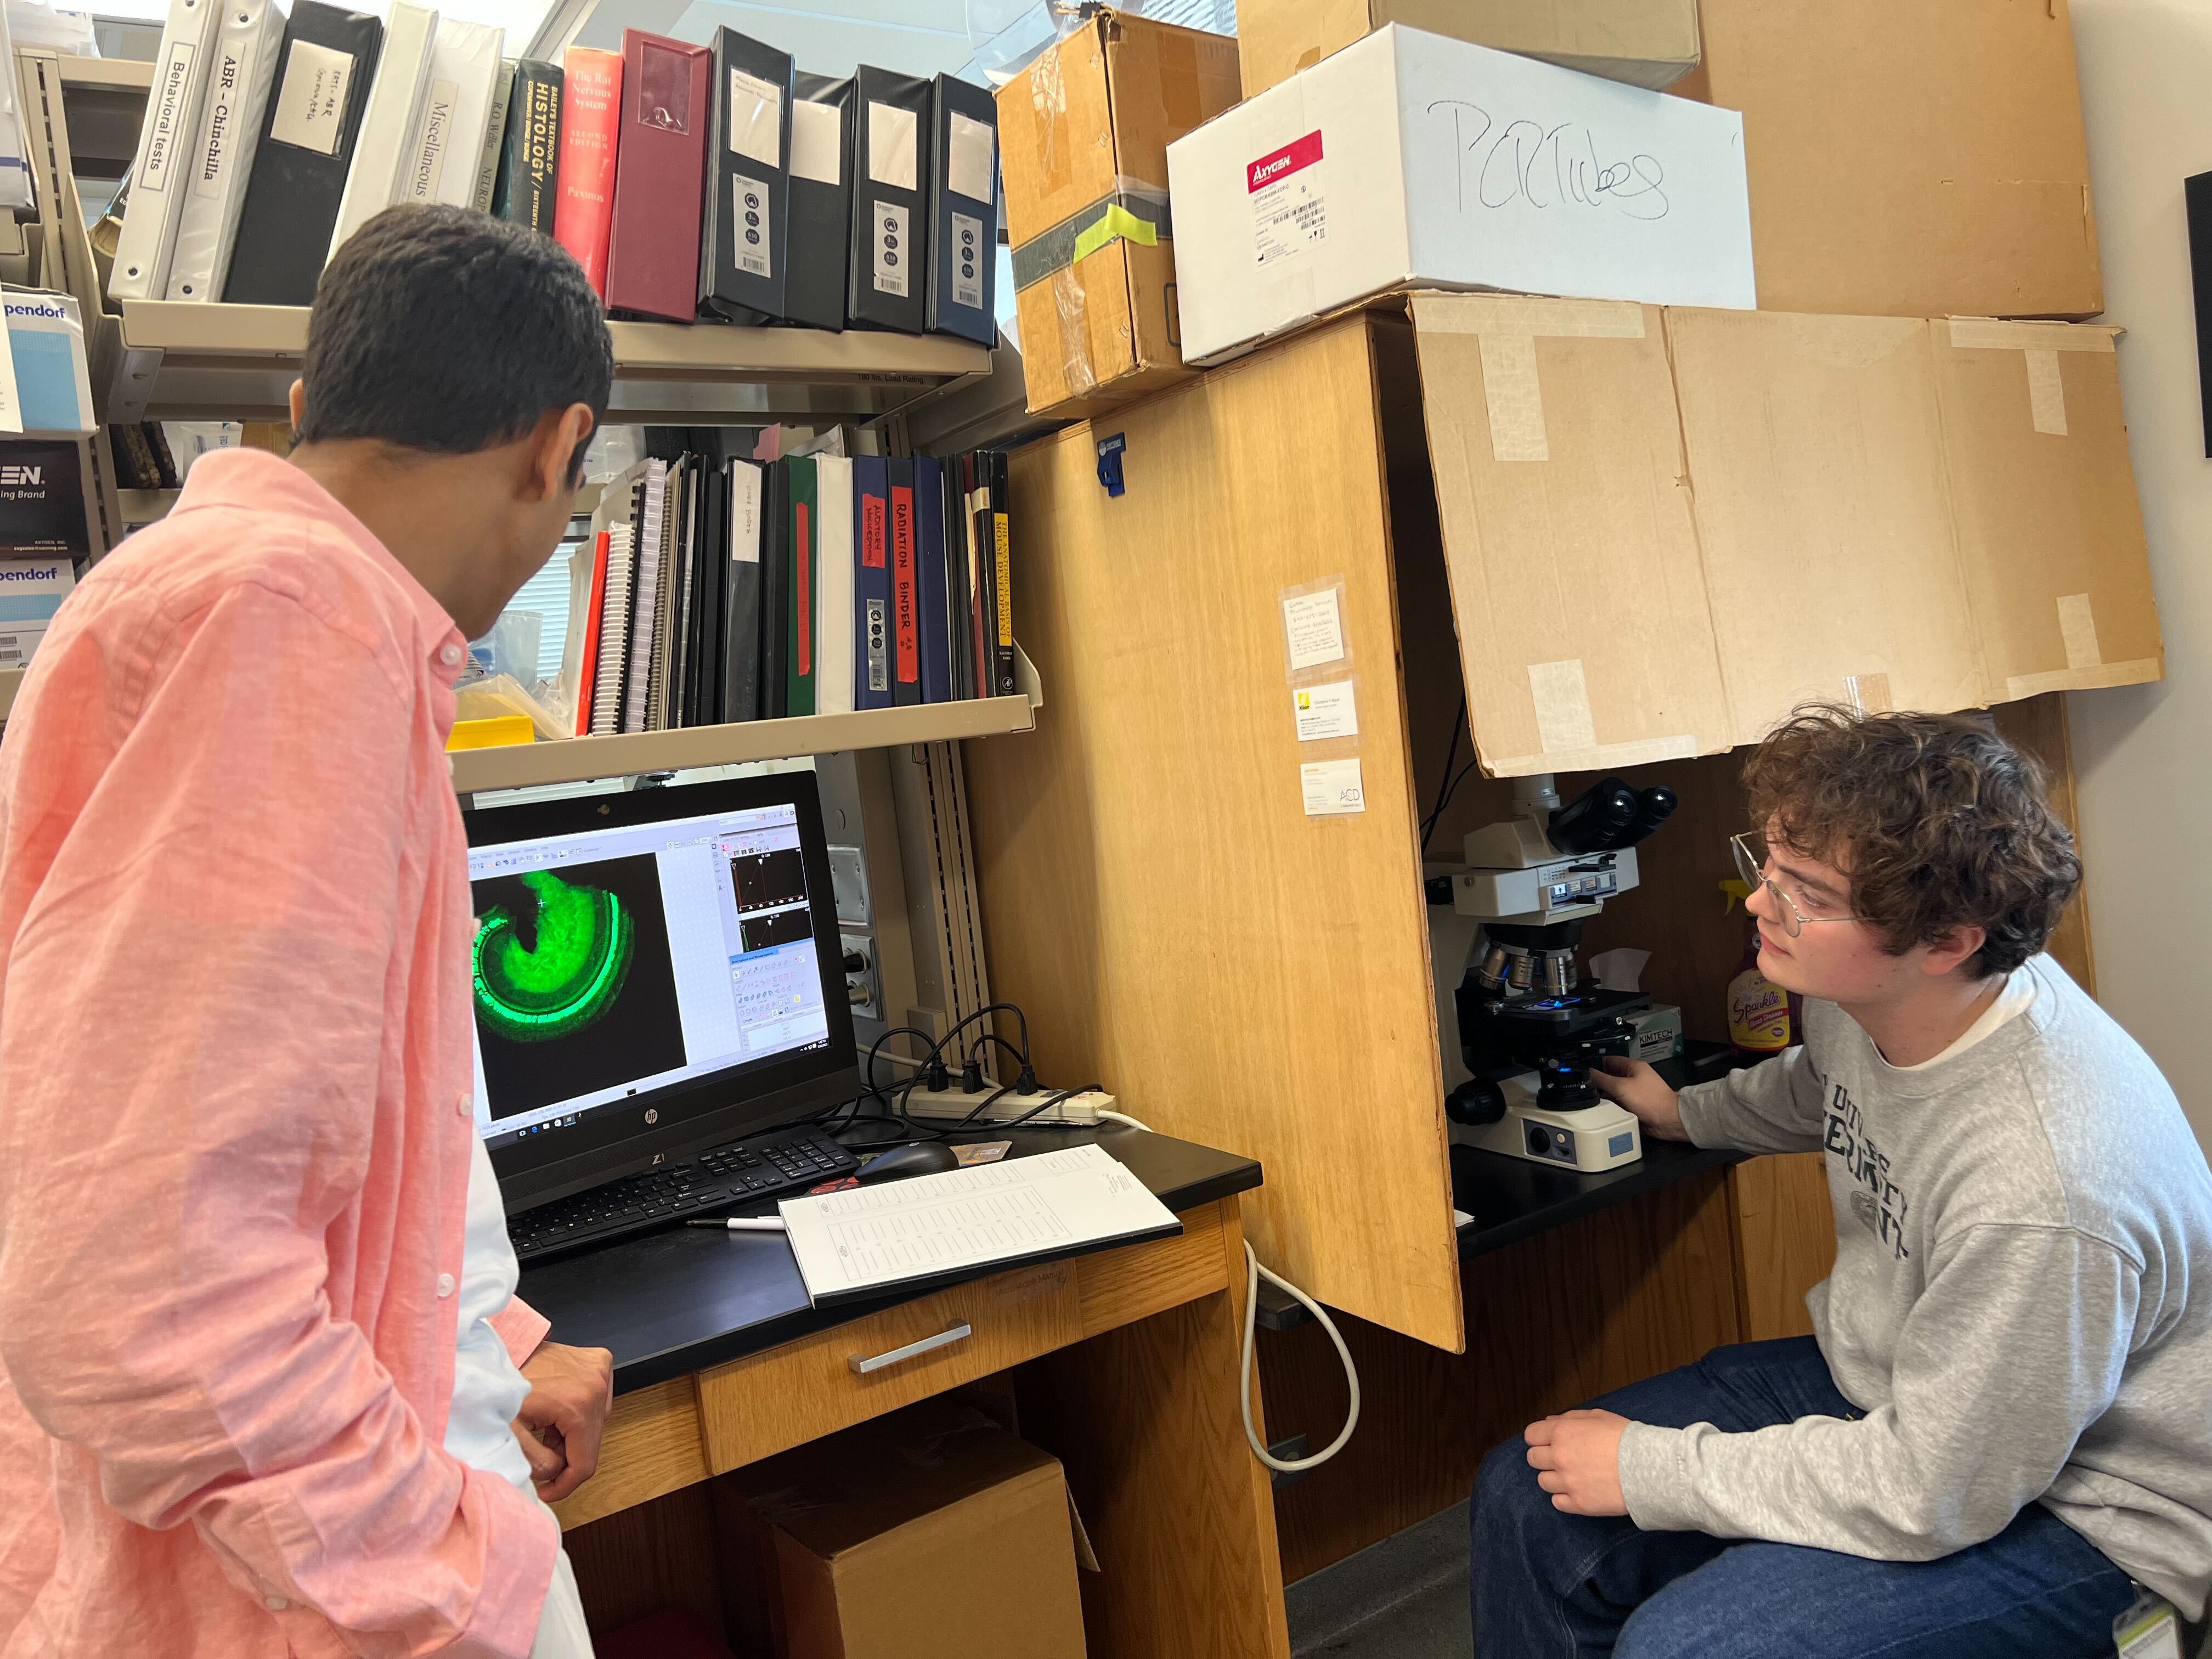 One intern operates a fluorescence microscope while another intern looks at the computer screen